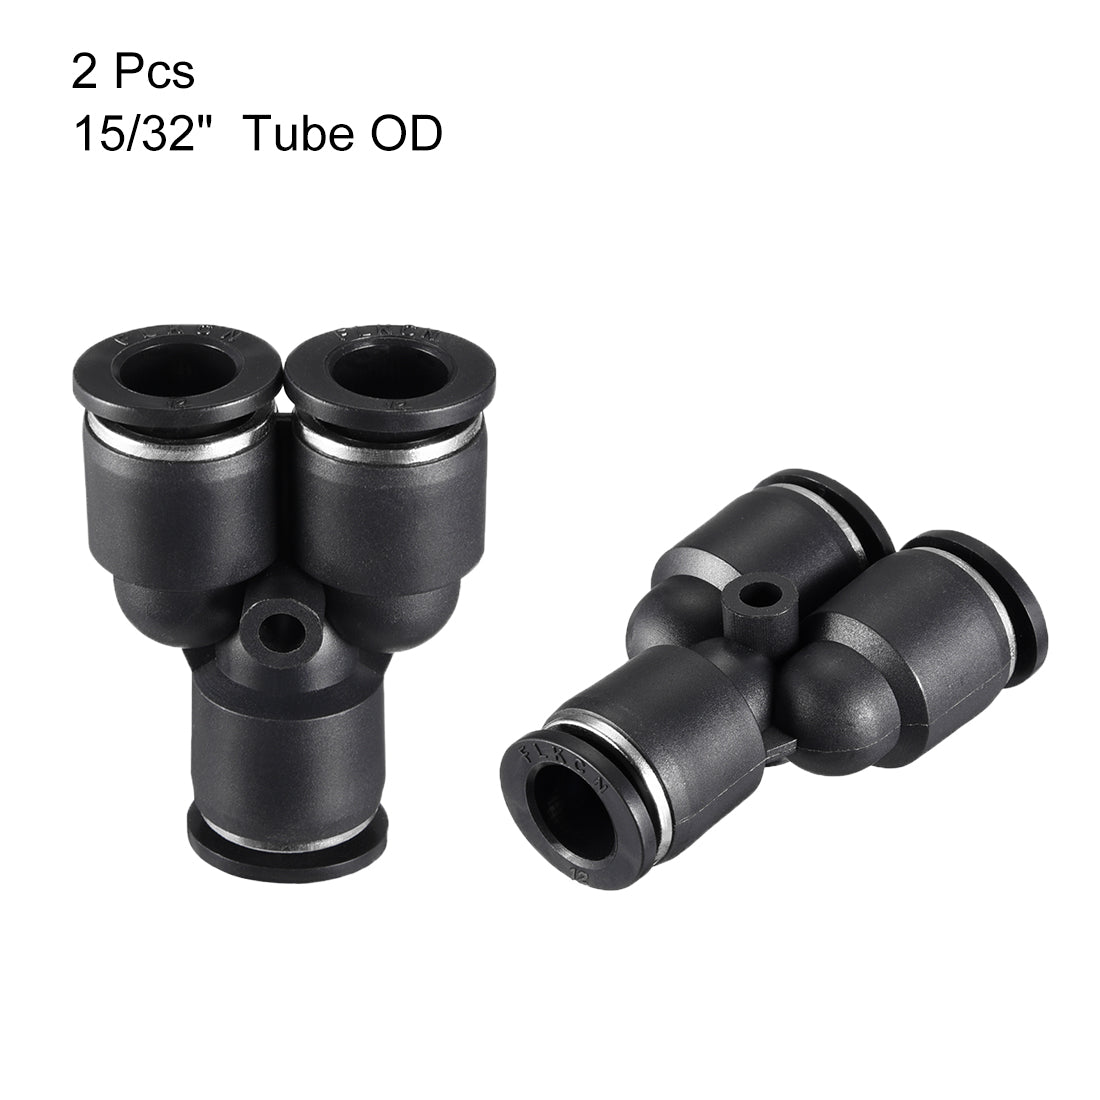 uxcell Uxcell 2pcs Push To Connect Fittings Y Type Tube Connect 12 mm or 15/32" od Push Fit Fittings Tube Fittings Push Lock Black(12mm Y tee)